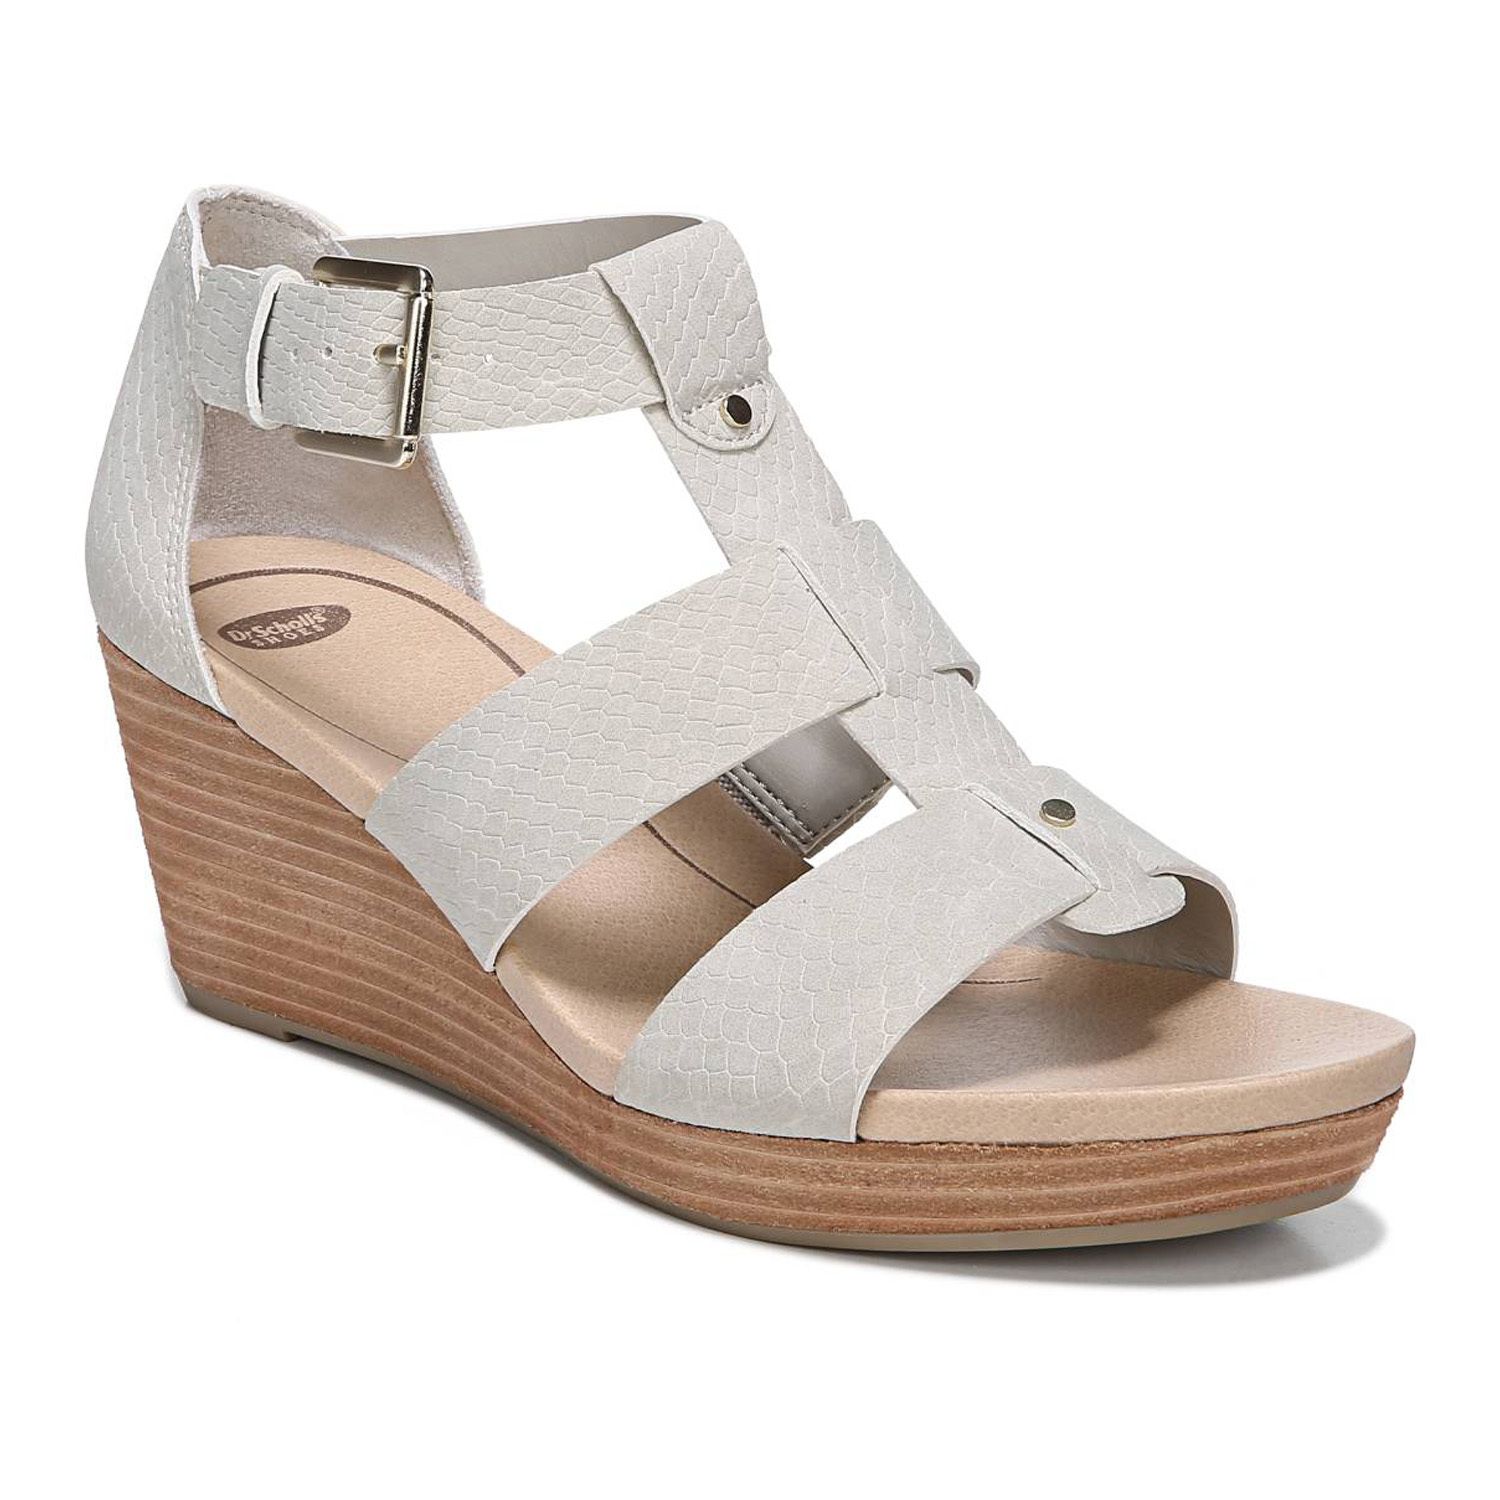 dr scholl's wedges